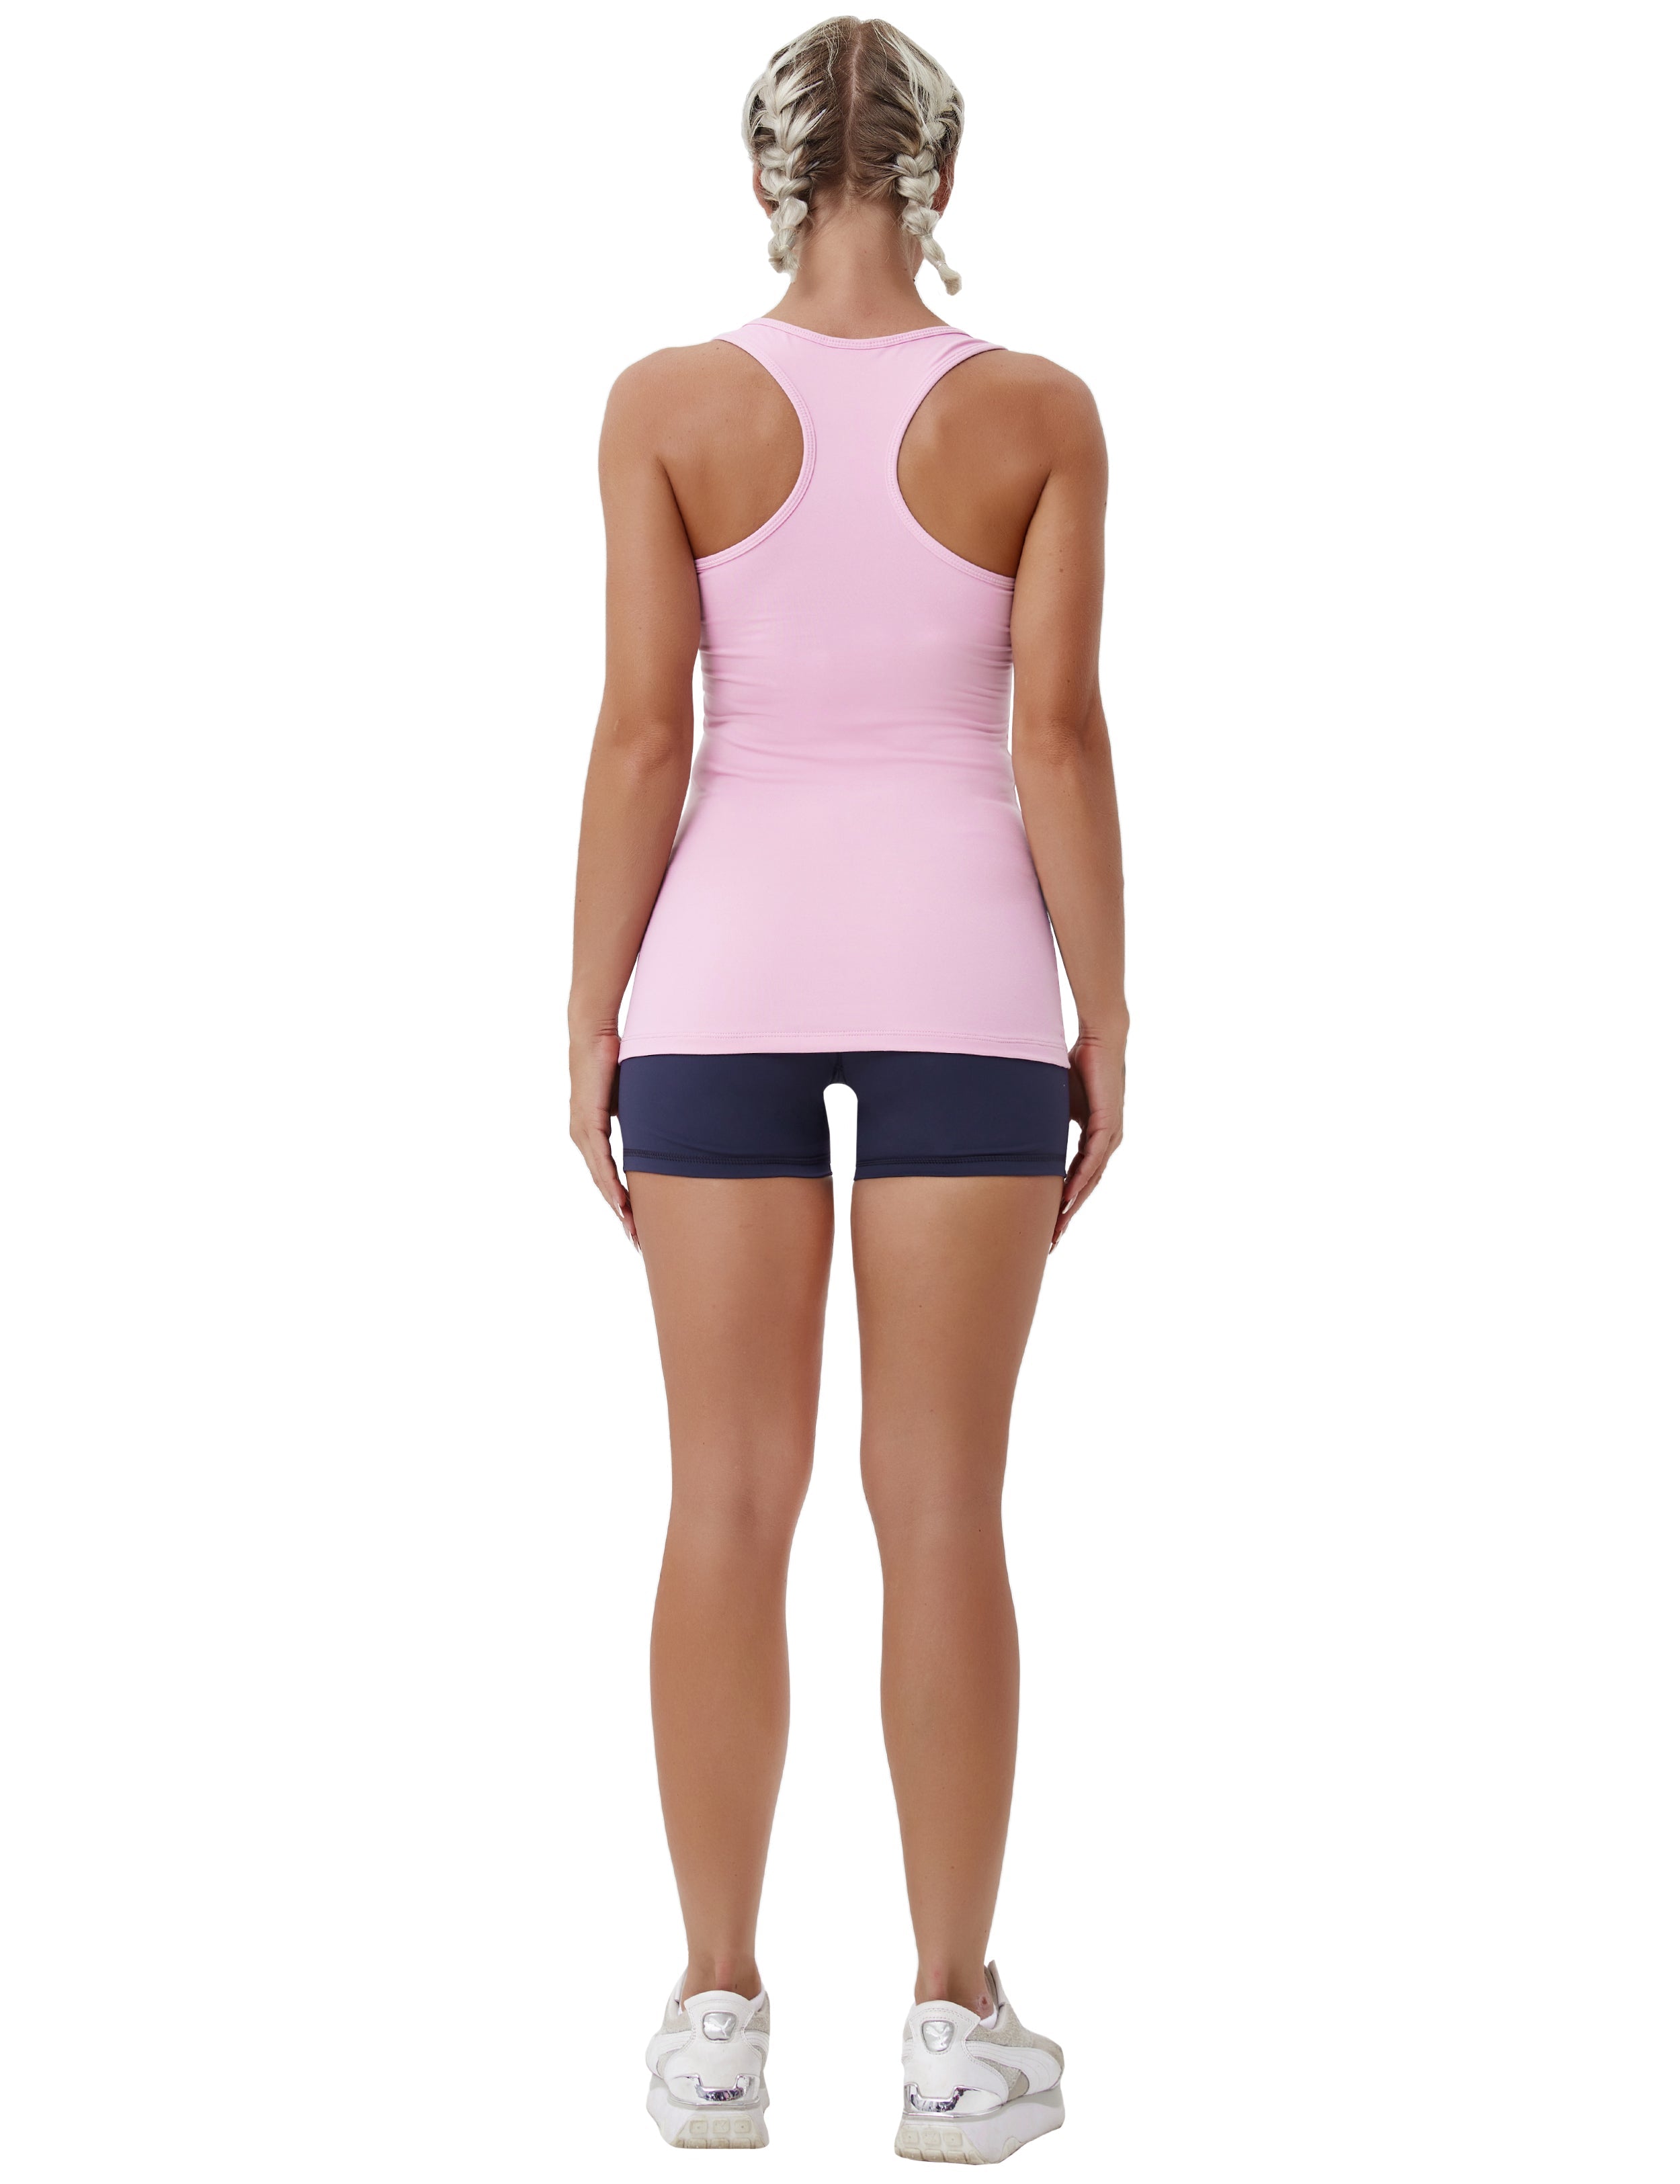 Racerback Athletic Tank Tops lightpink 92%Nylon/8%Spandex(Cotton Soft) Designed for Golf Tight Fit So buttery soft, it feels weightless Sweat-wicking Four-way stretch Breathable Contours your body Sits below the waistband for moderate, everyday coverage